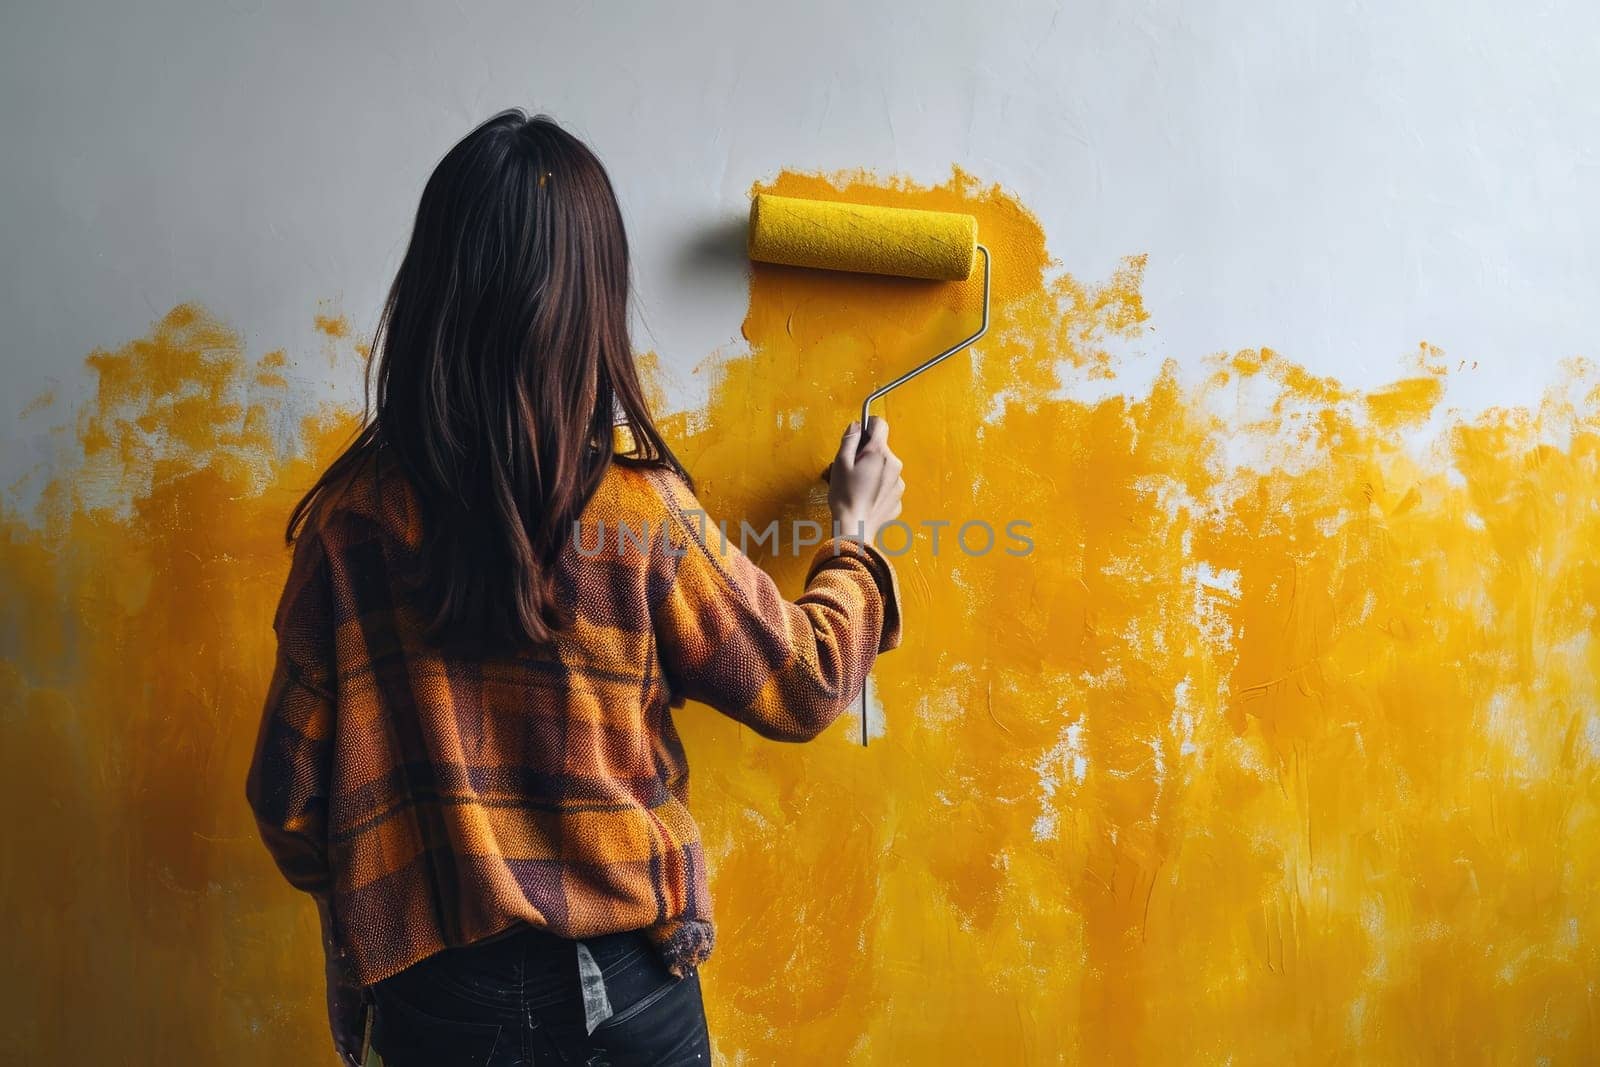 Girl painting the wall with a paint roller by Yurich32